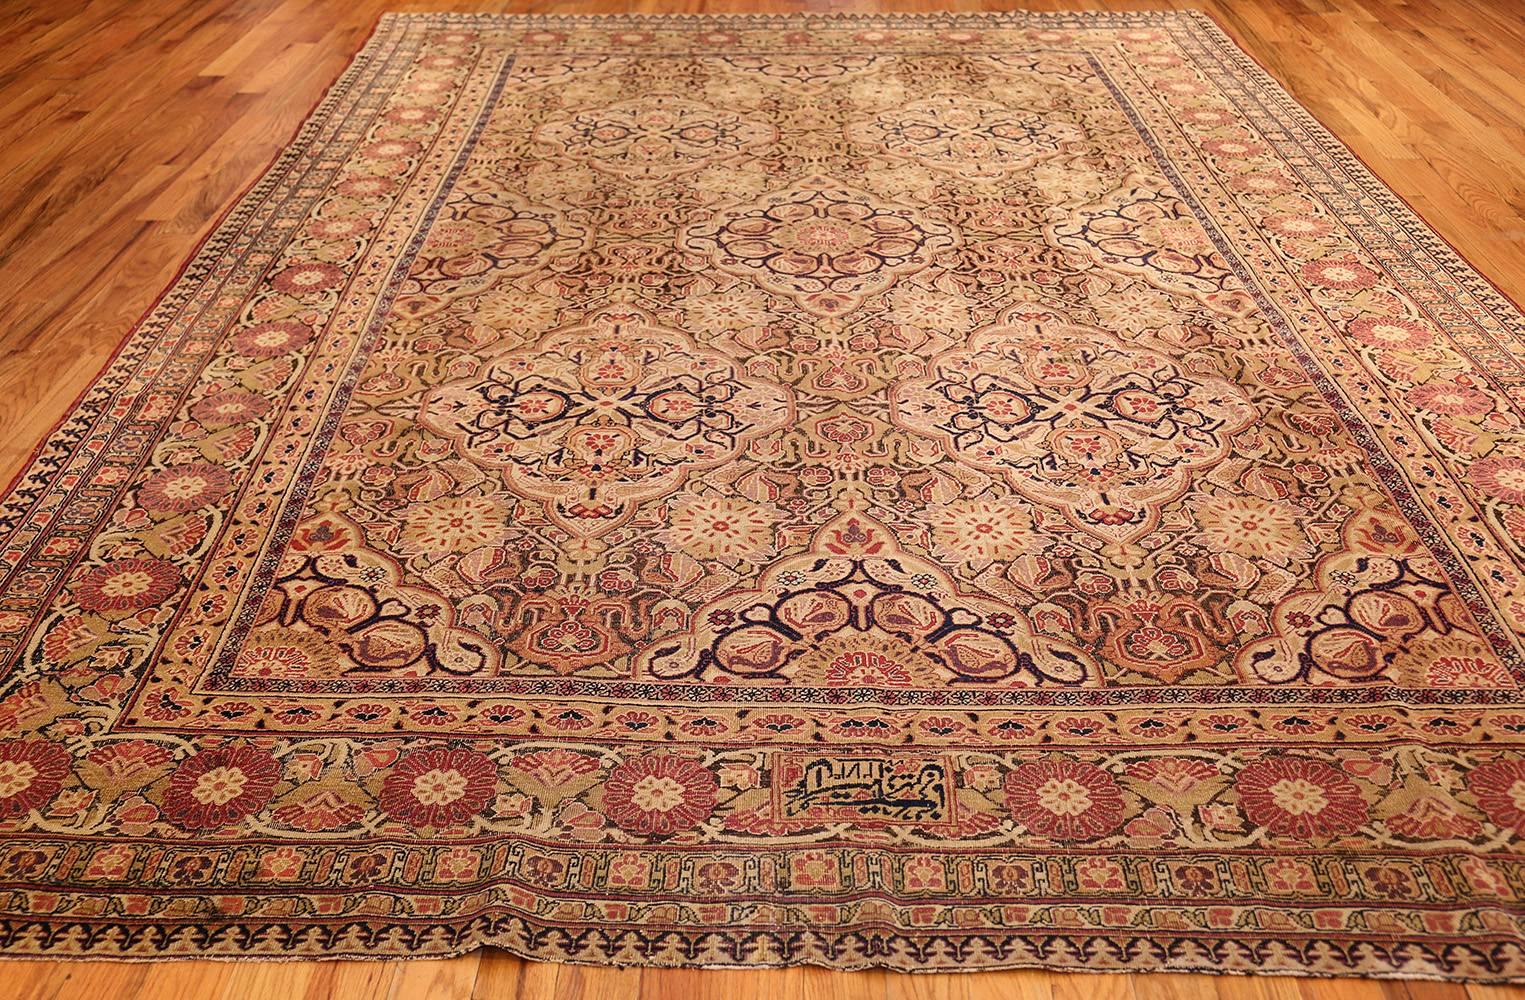 Wool Antique Kerman Persian Rug. Size: 8 ft 9 in x 13 ft 1 in (2.67 m x 3.99 m)